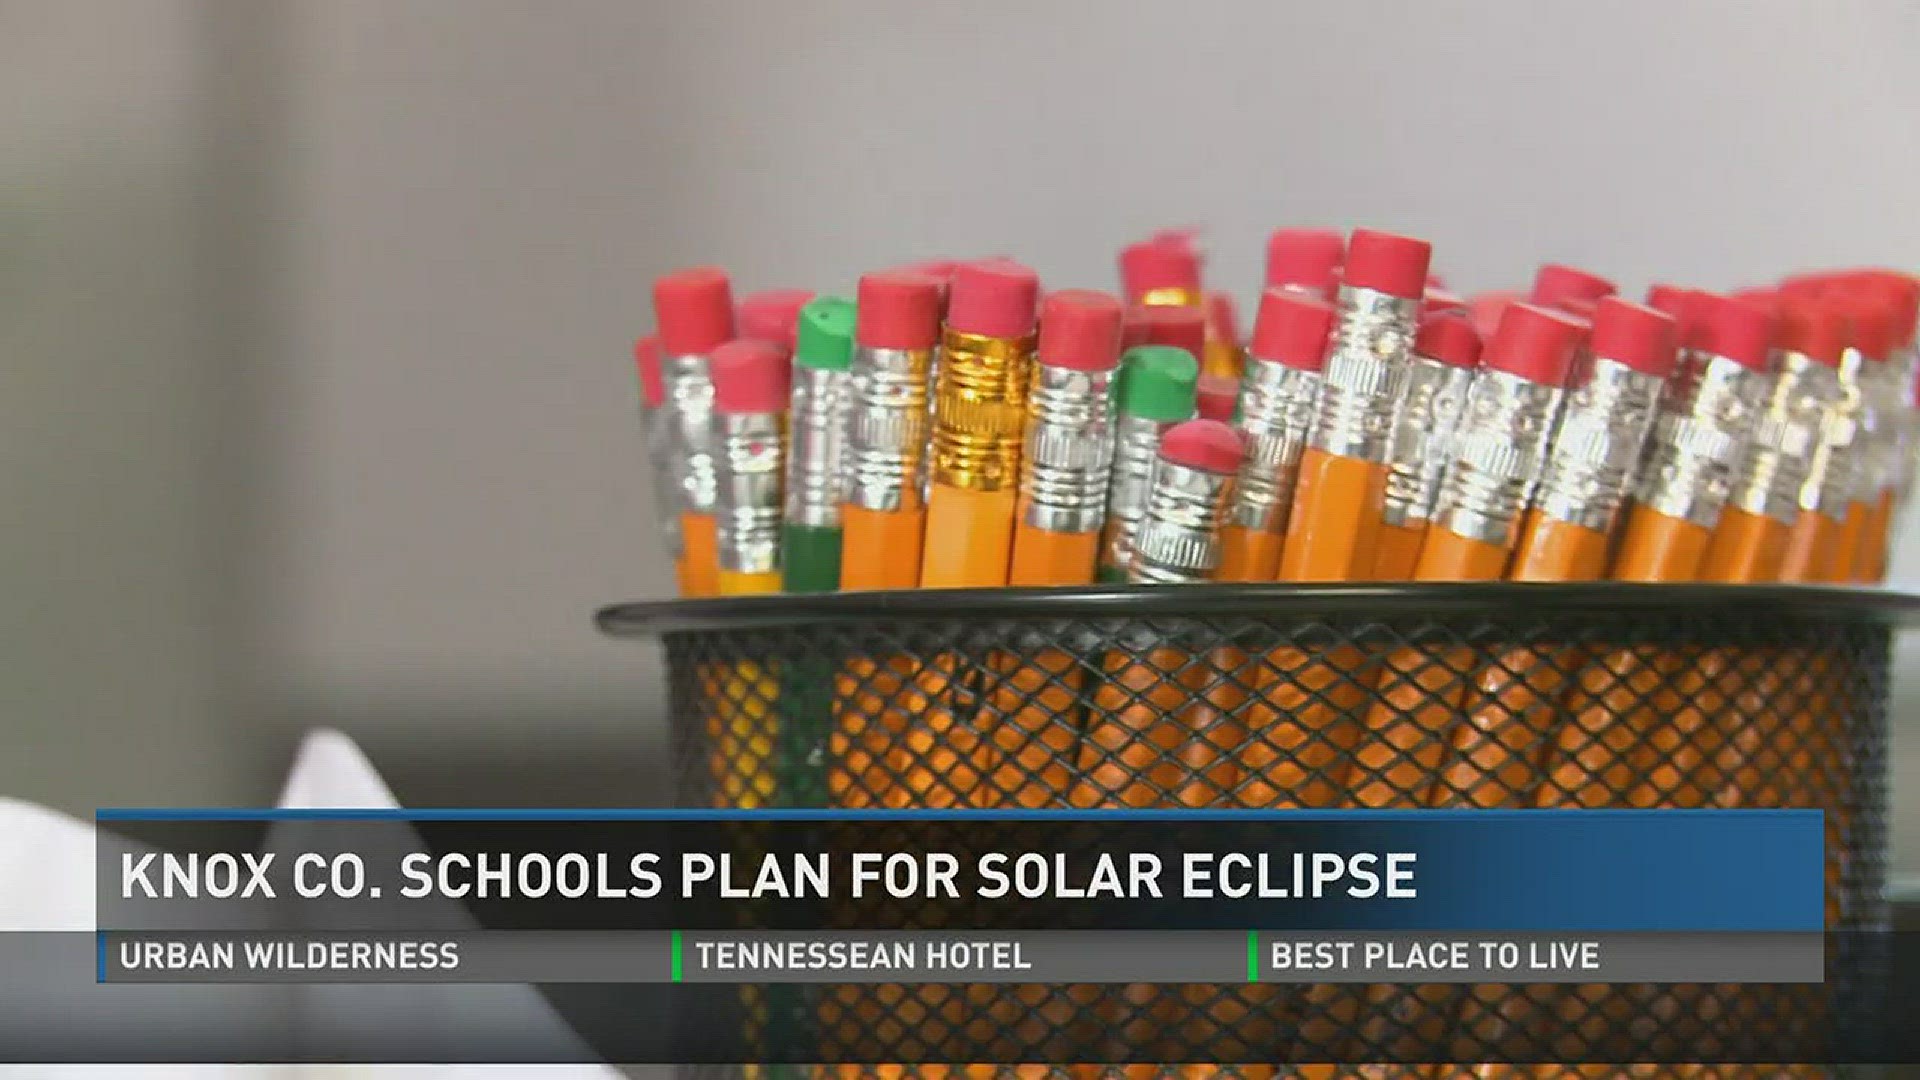 Knox County School leaders explain their reasoning for canceling classes on August 21 for the solar eclipse. (7-14-17 11 p.m.)